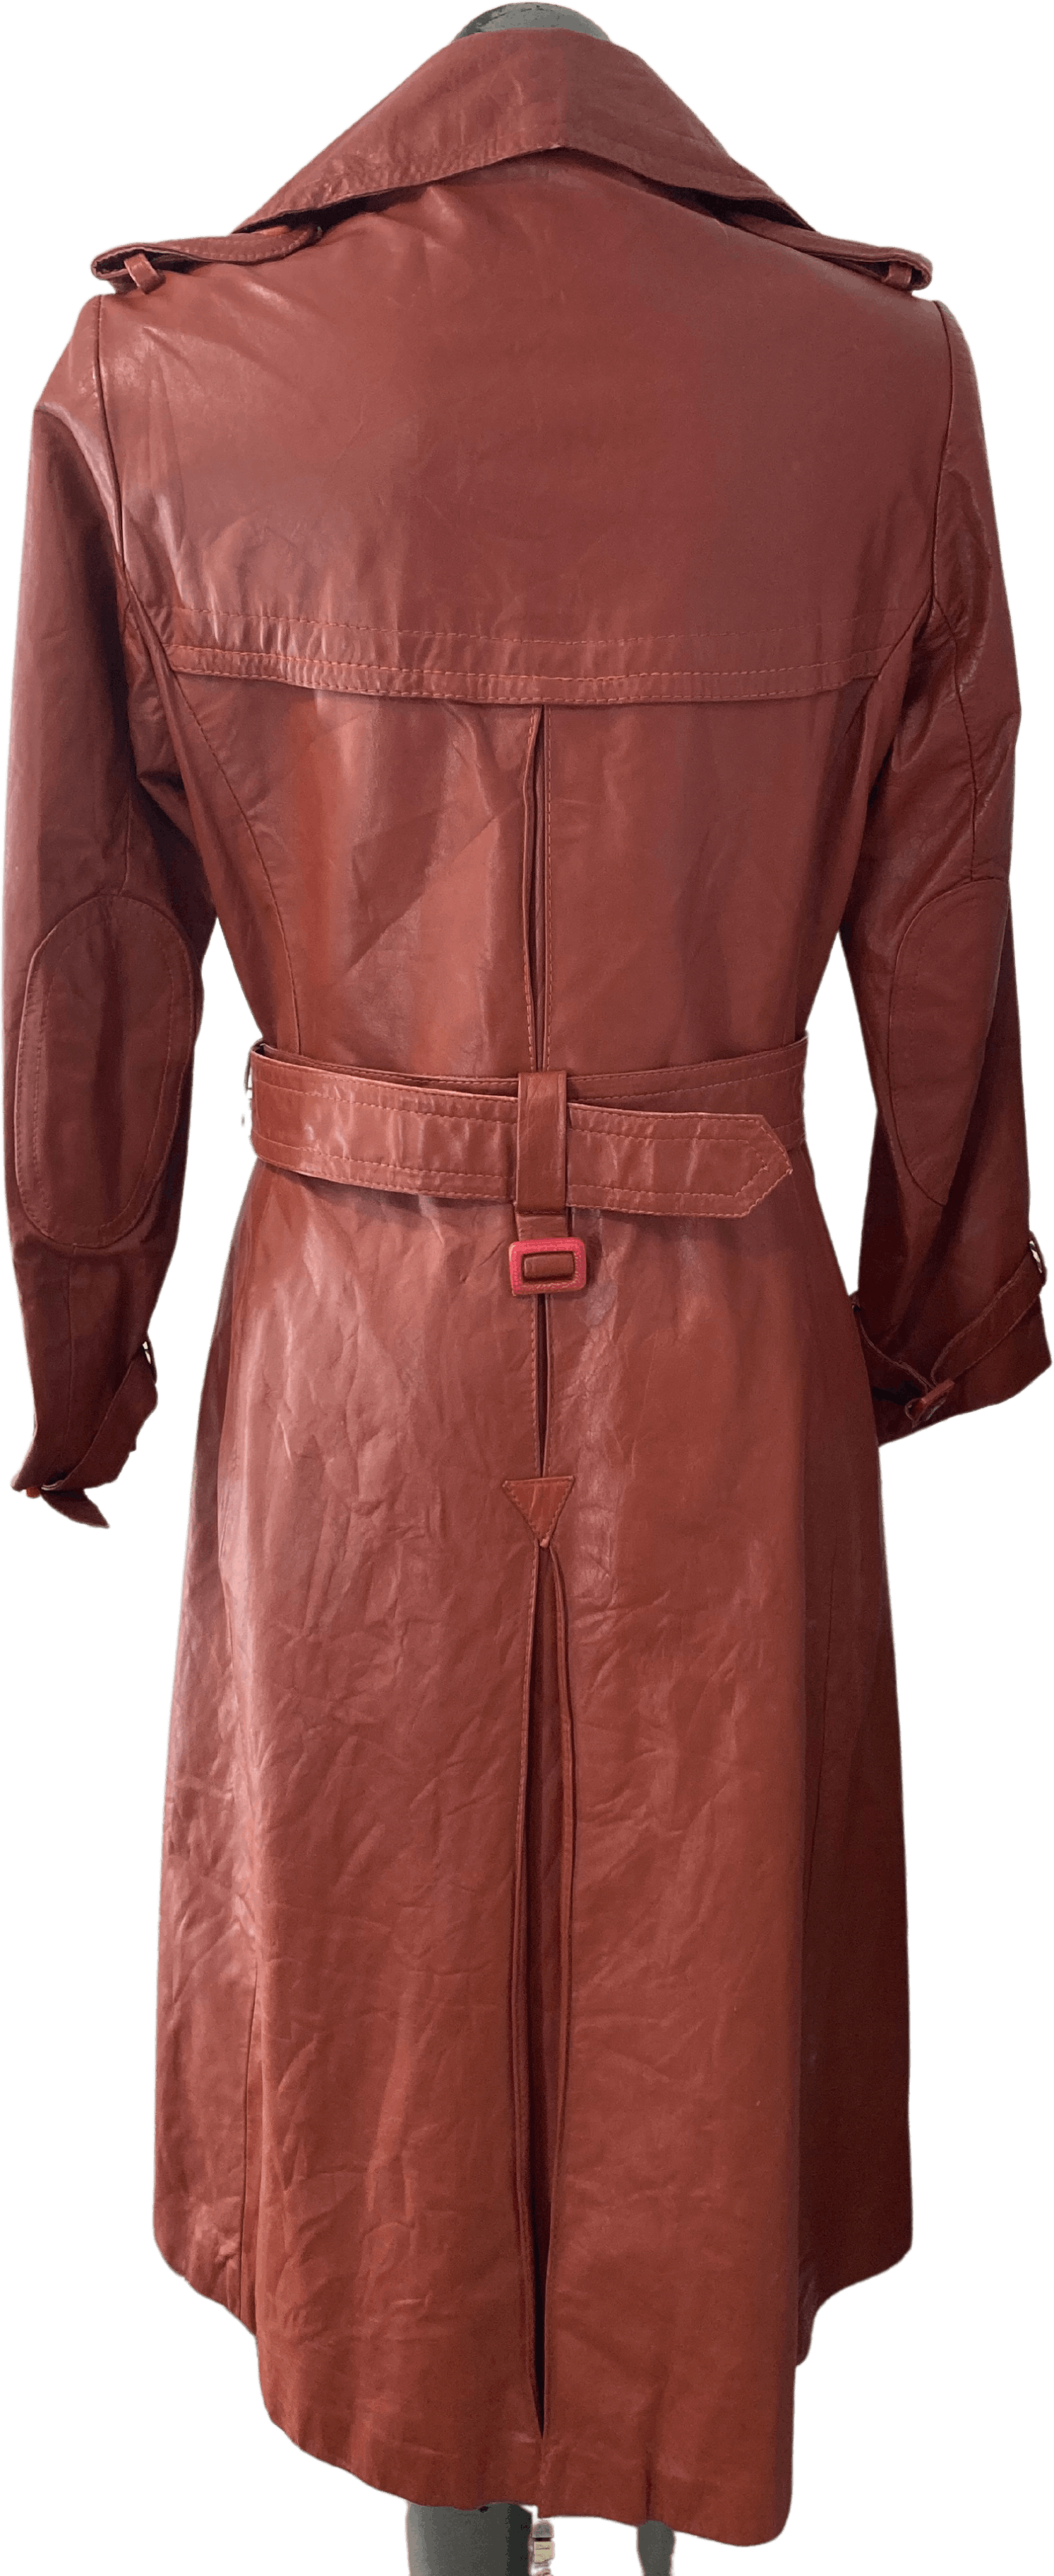 Vintage 70's Red Leather Coat by Genuine Leather | Shop THRILLING